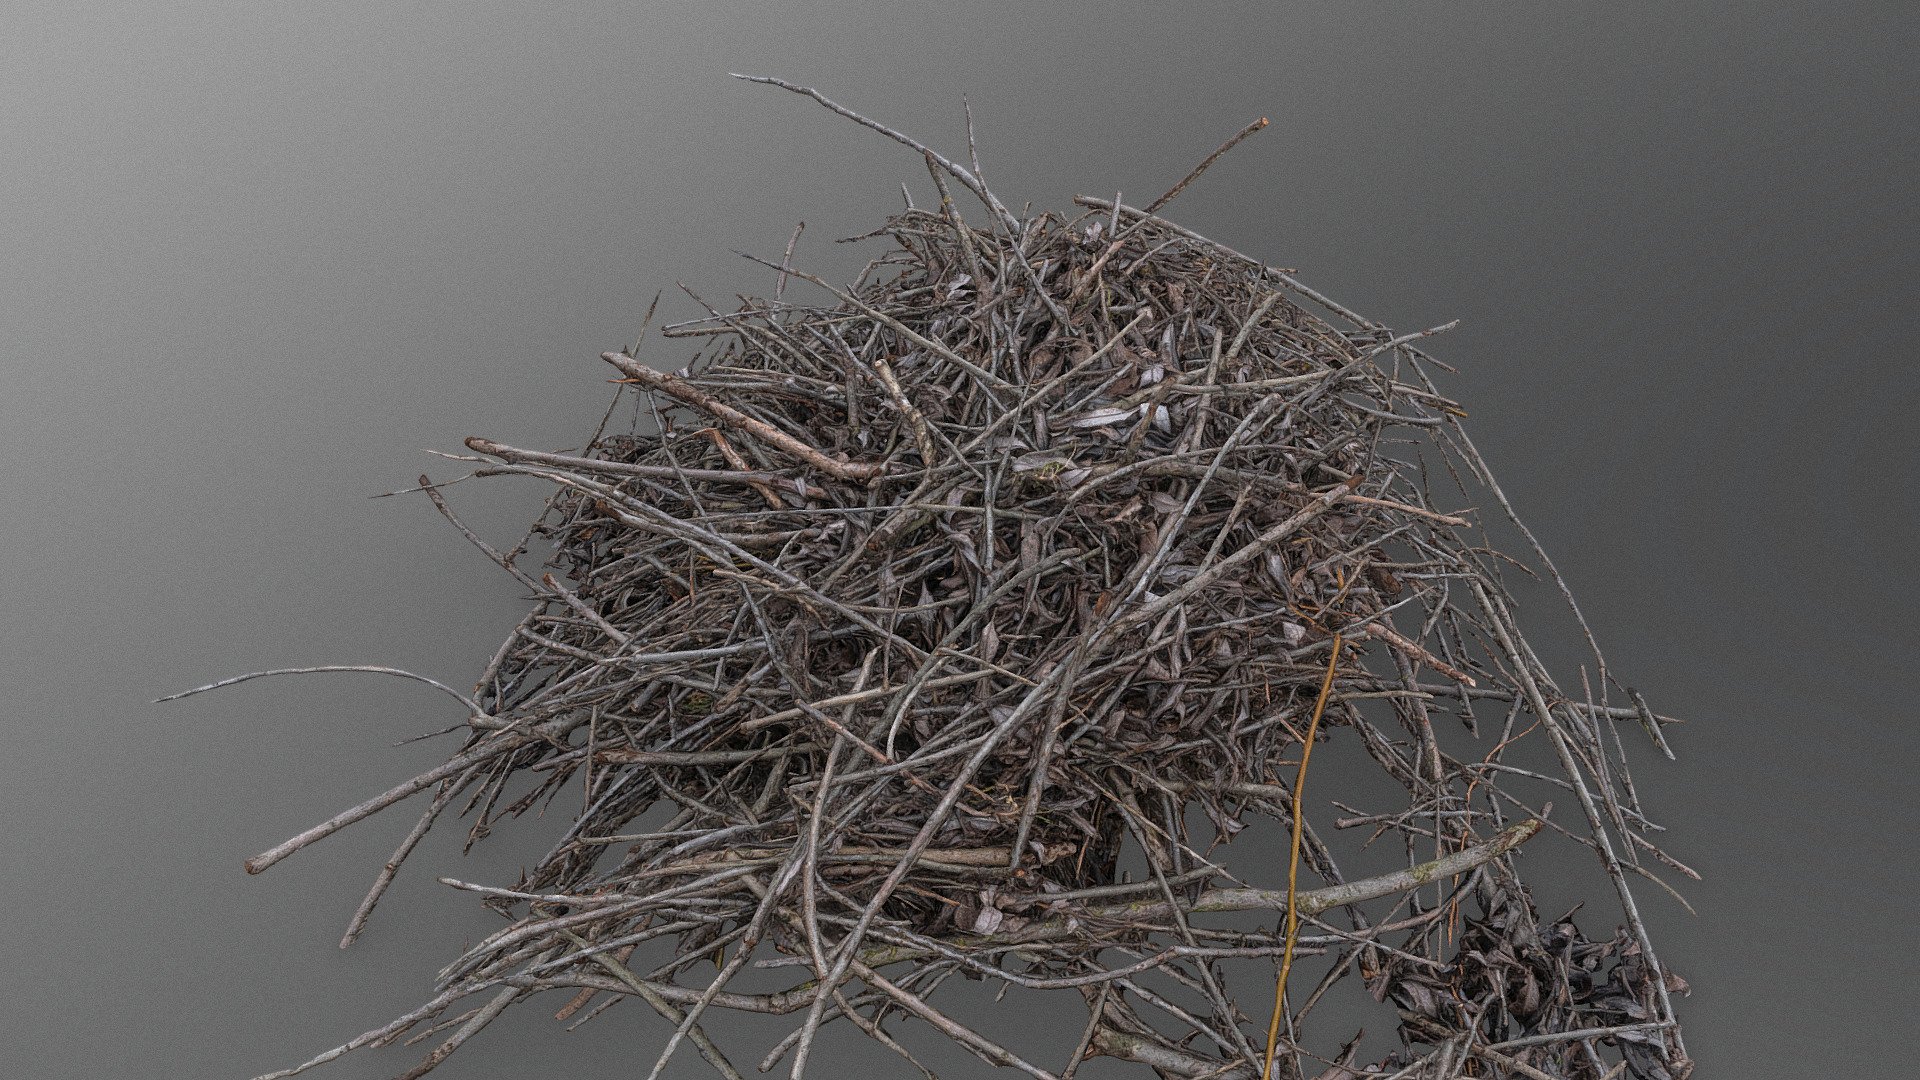 Sawed cut Tree bush dry dead small short young branch branches wood pile heap stack

photogrammetry scan (140x36mp), 2x8k textures - Small branches pile - Buy Royalty Free 3D model by matousekfoto 3d model